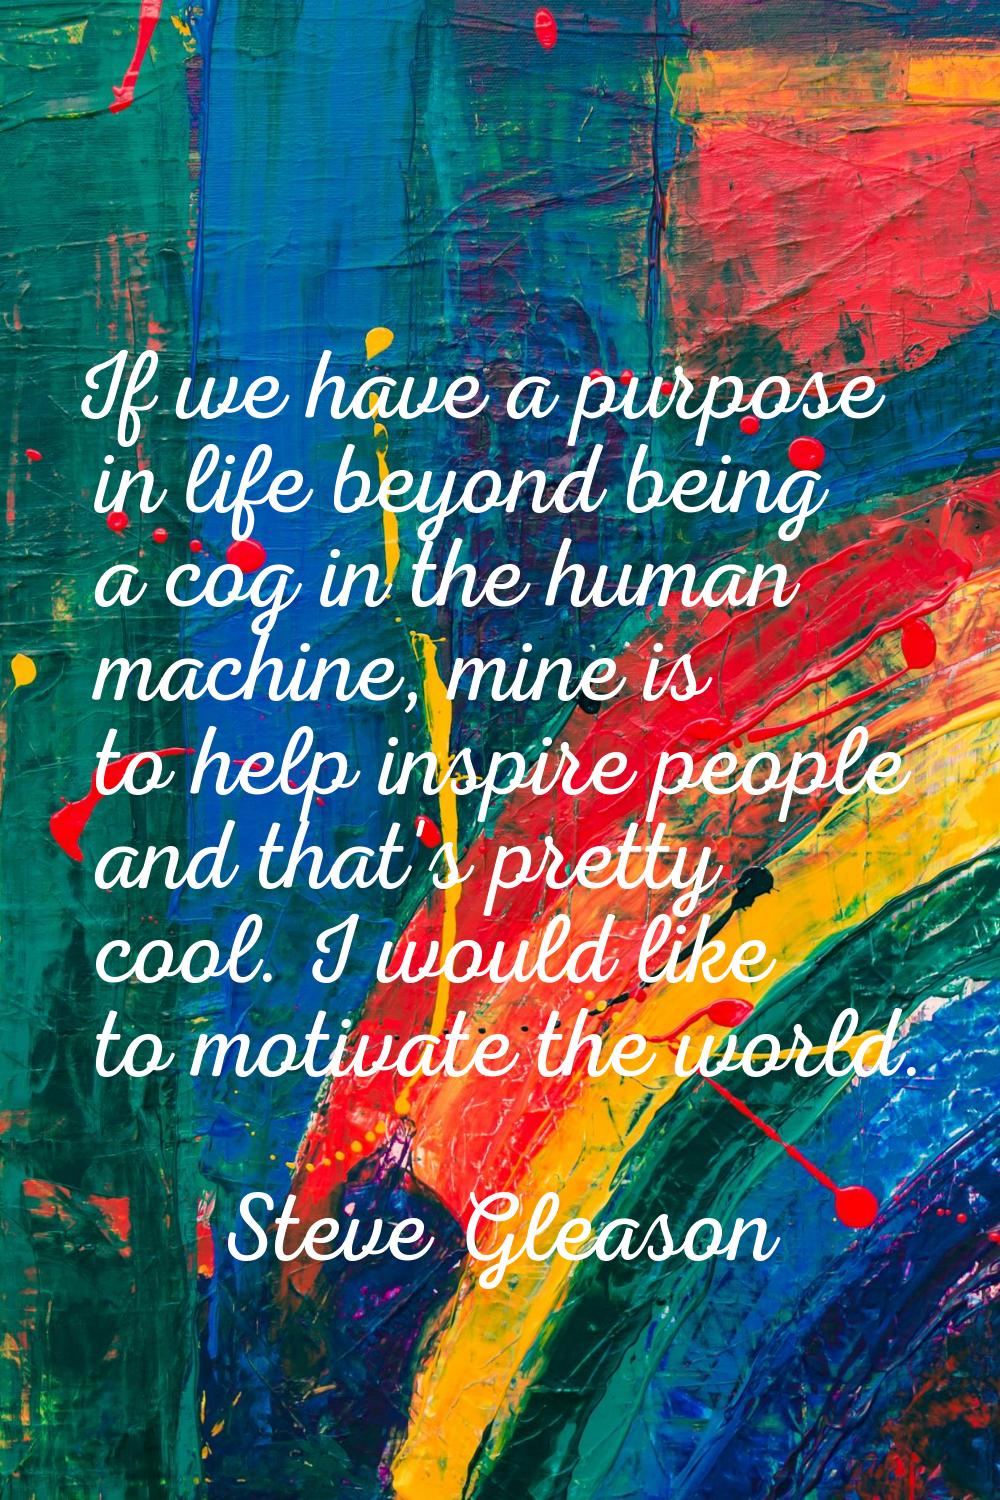 If we have a purpose in life beyond being a cog in the human machine, mine is to help inspire peopl